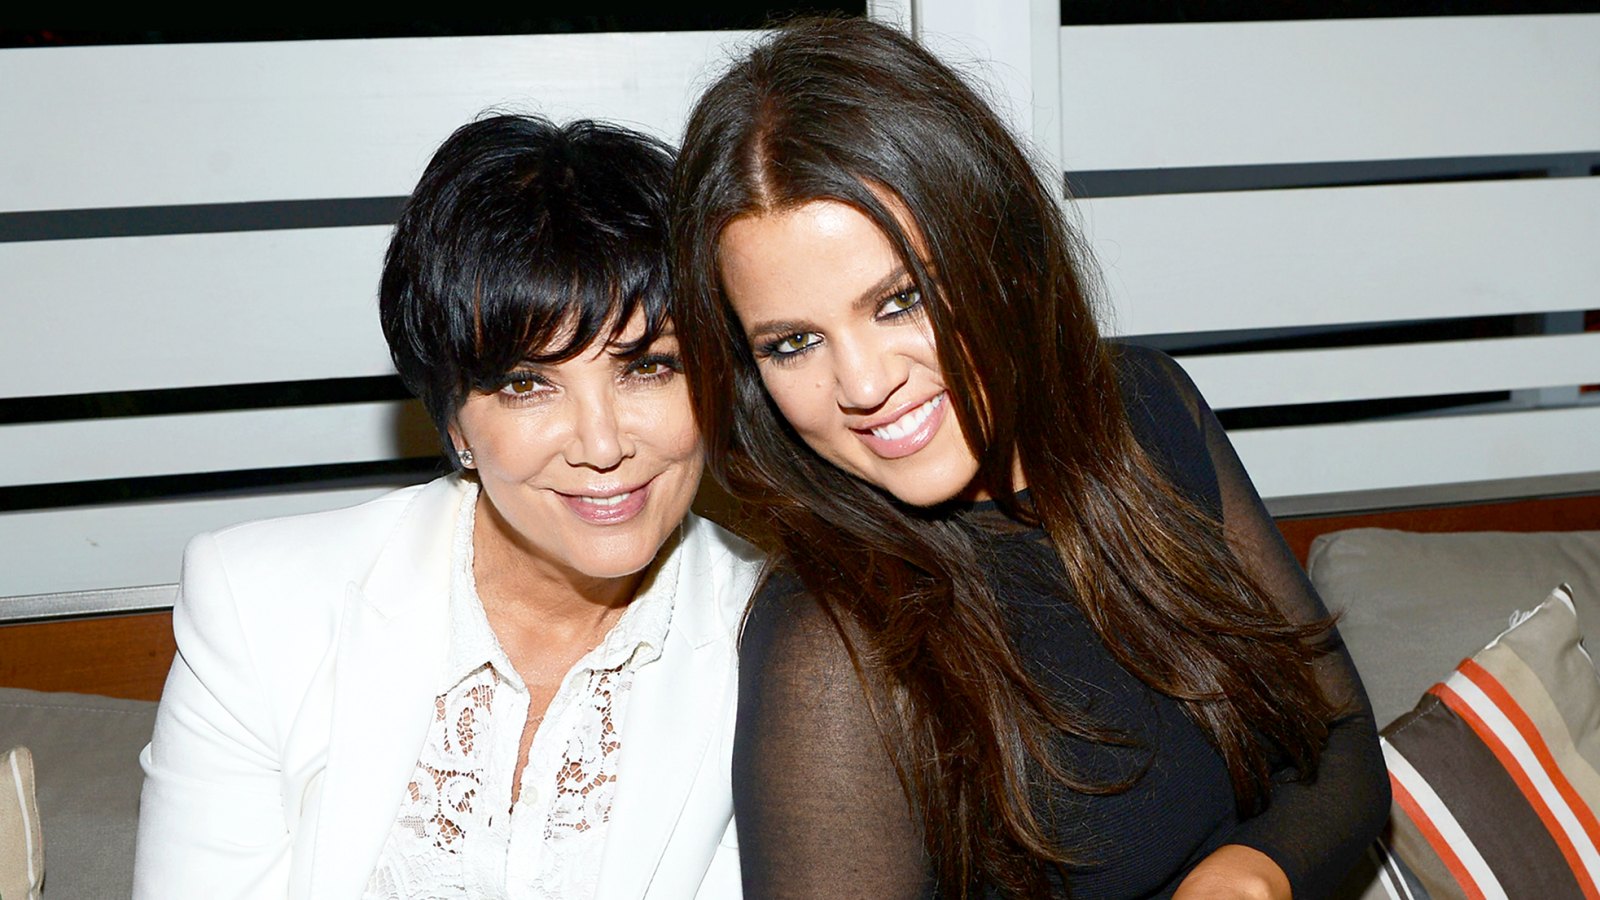 Kris Jenner and Khloe Kardashian attend the 2012 Seventeen Magazine's September Issue Celebration at the W Hotel Westwood in Westwood, California.